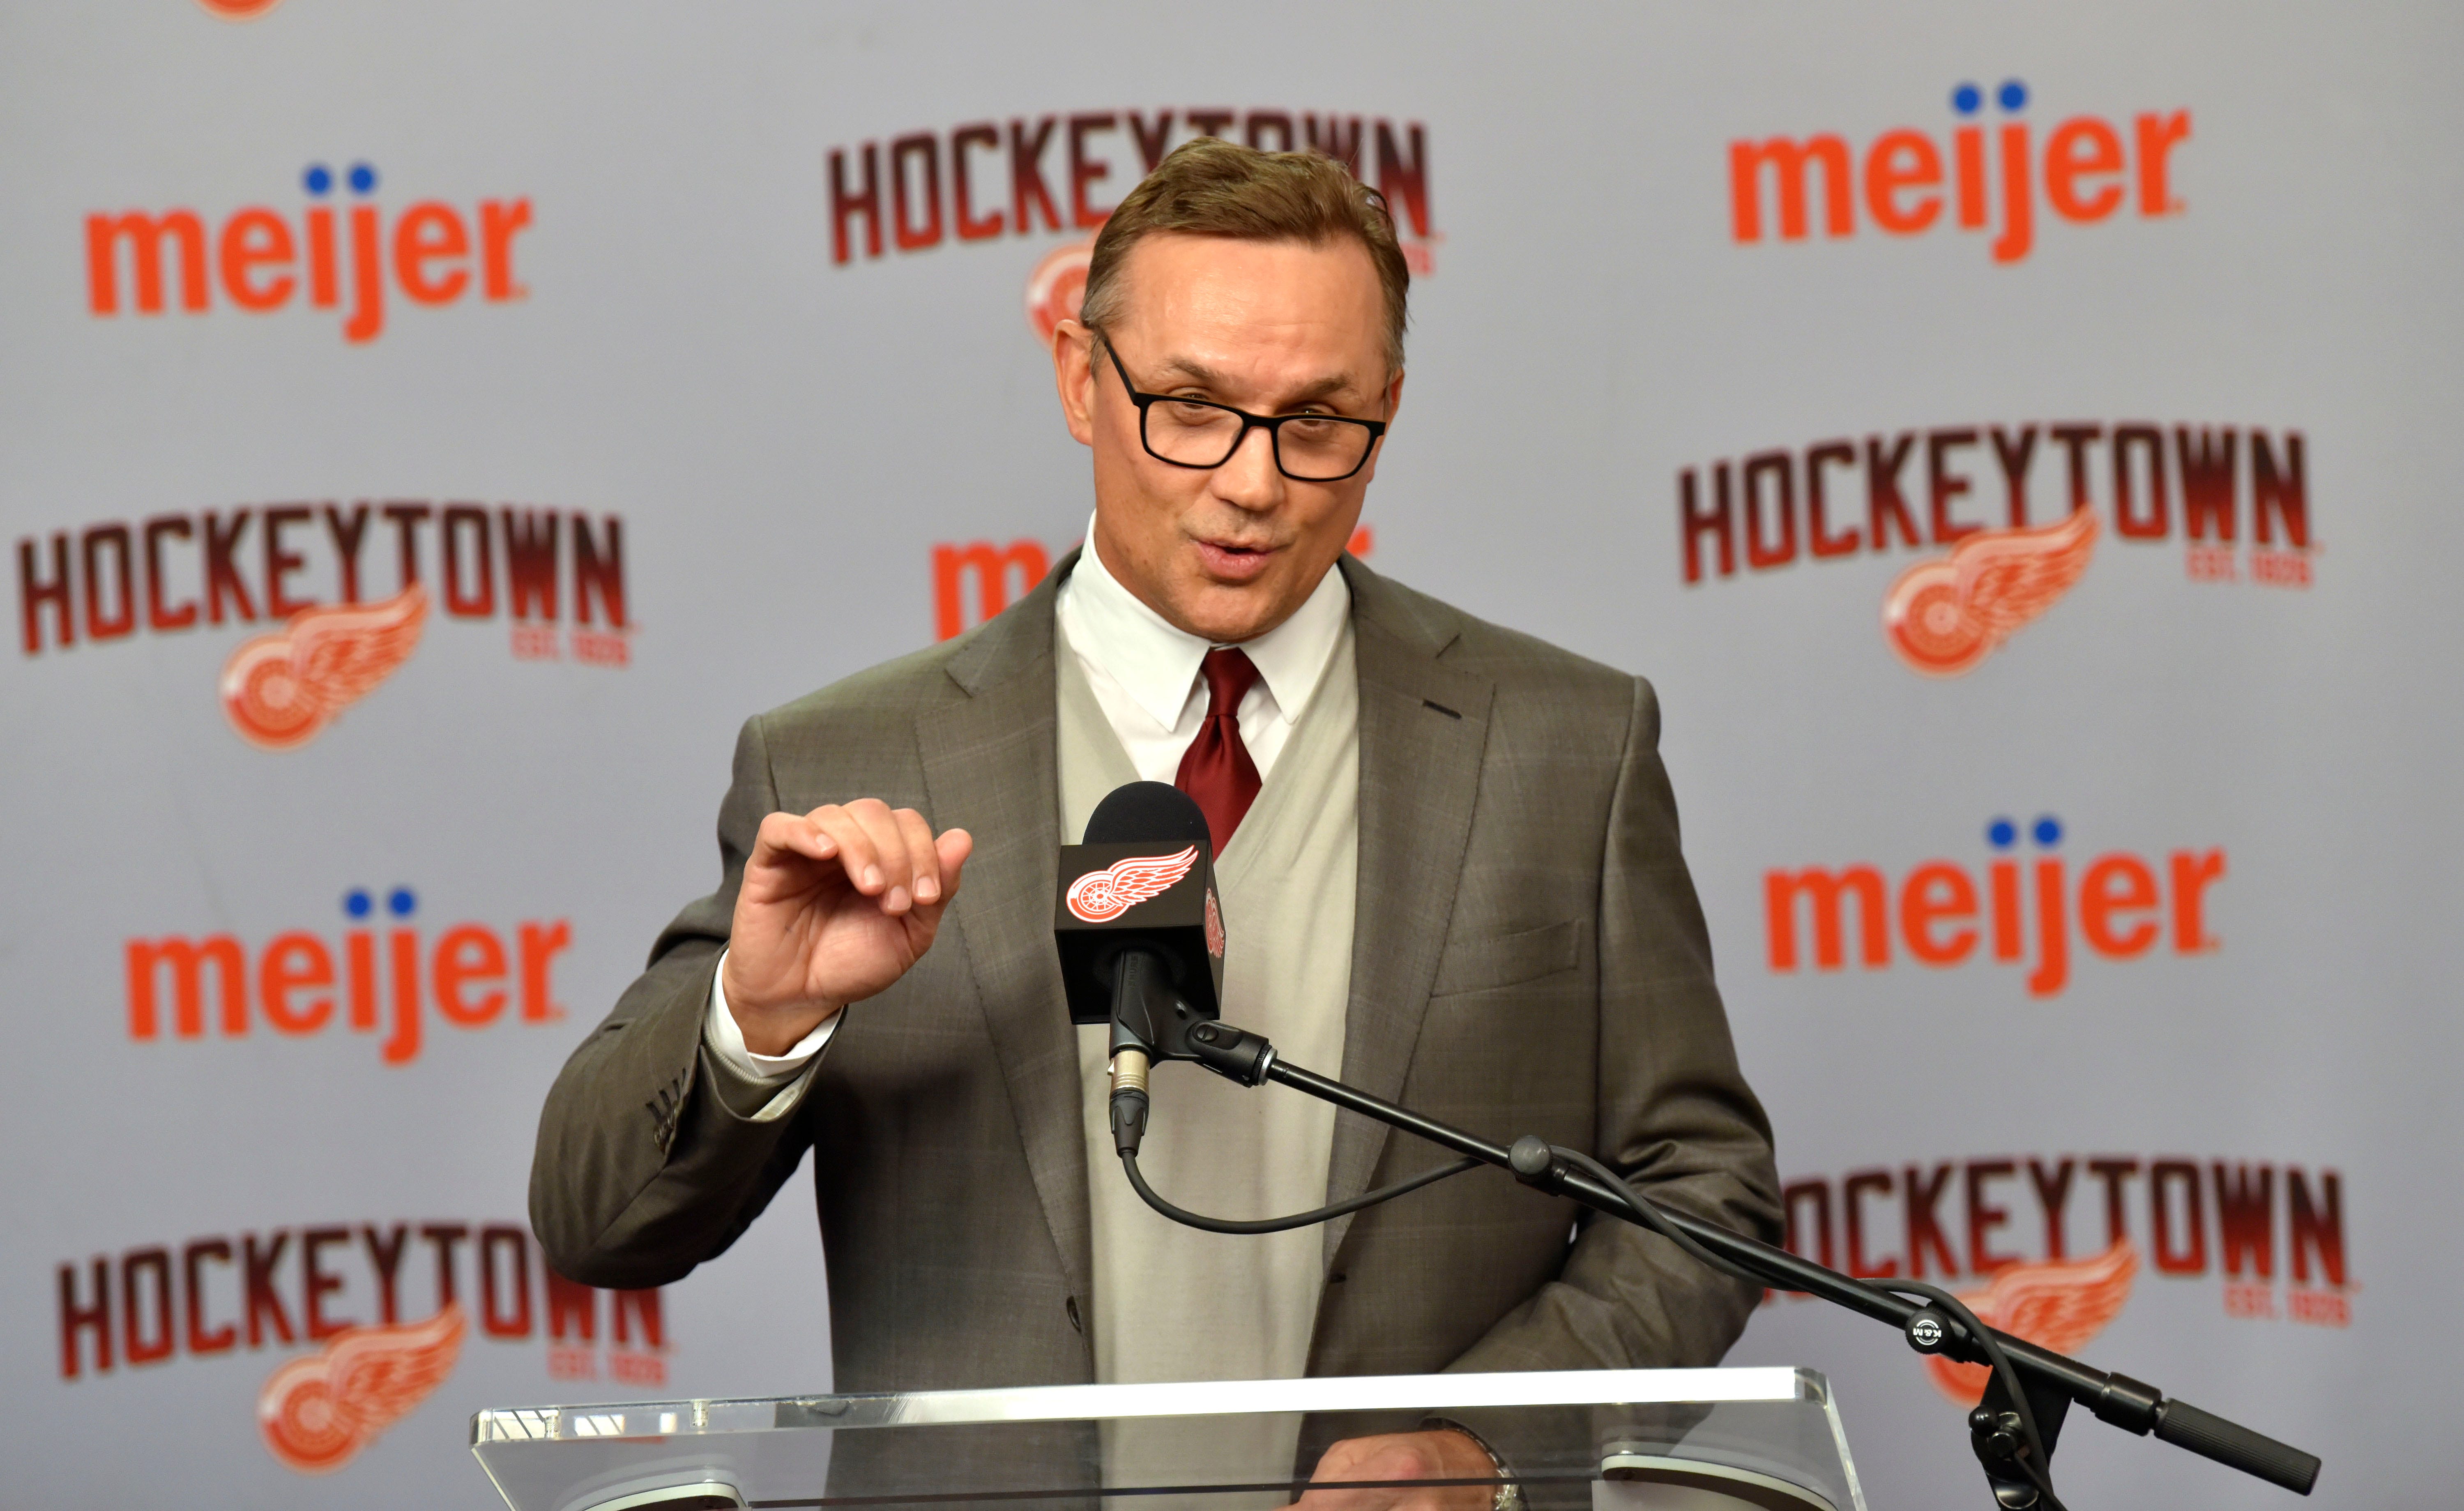 FRONT OFFICE – General manager Steve Yzerman knew he’d have his work cut out for him, and his first season definitely showed it’s going to be a big undertaking to get this organization back to where it was. There were hits (Robby Fabbri, Patrik Nemeth, Alex Biega, drafting Moritz Seider) and misses (Valtteri Filppula, Brendan Perlini, Adam Erne) in Yzerman’s acquisitions, and he appeared to get good hauls for Mike Green and Andreas Athanasiou at the trade deadline. But there’s still so much work ahead. GRADE: C.